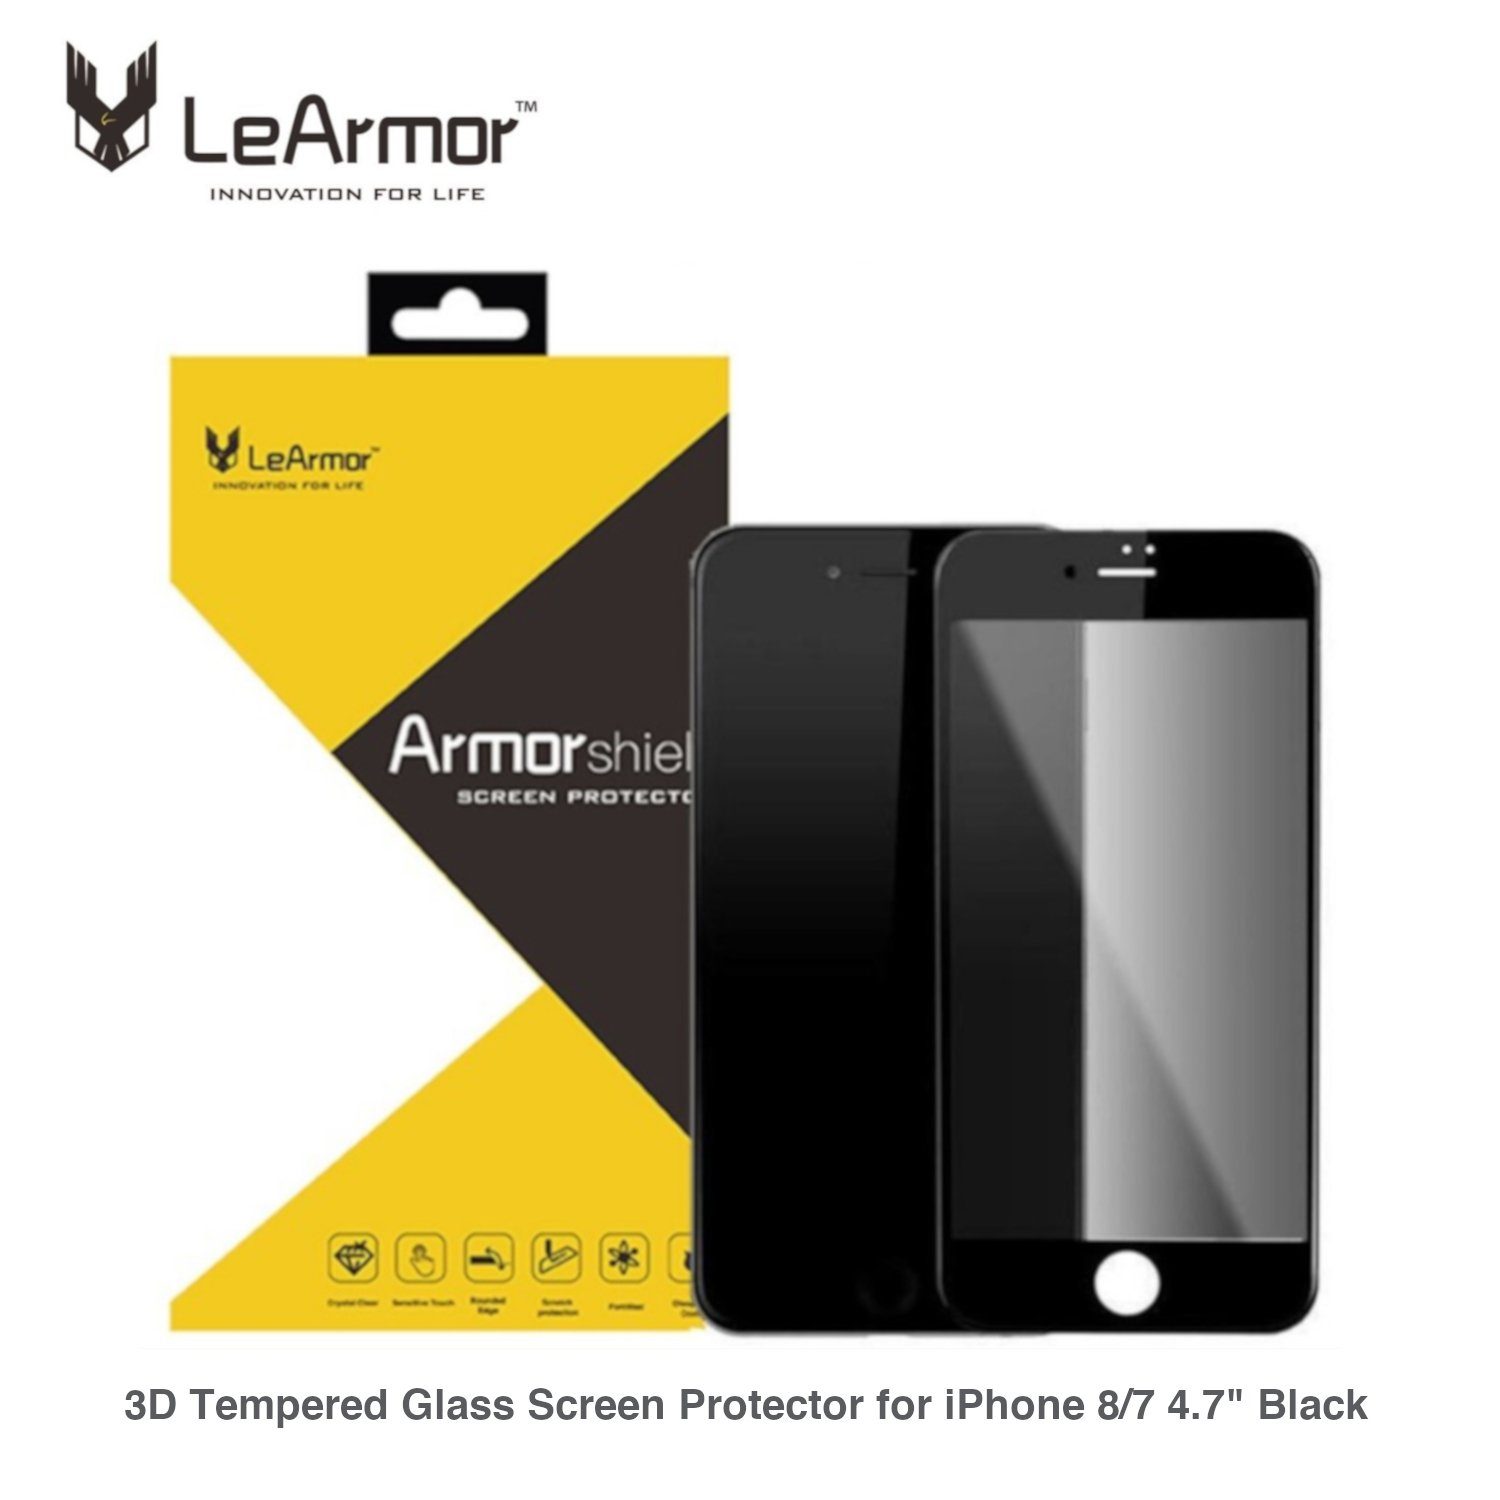 LeArmor 3D Tempered Glass Screen Protector for iPhone 8/7 4.7", Black Tempered Glass LeArmor Black 